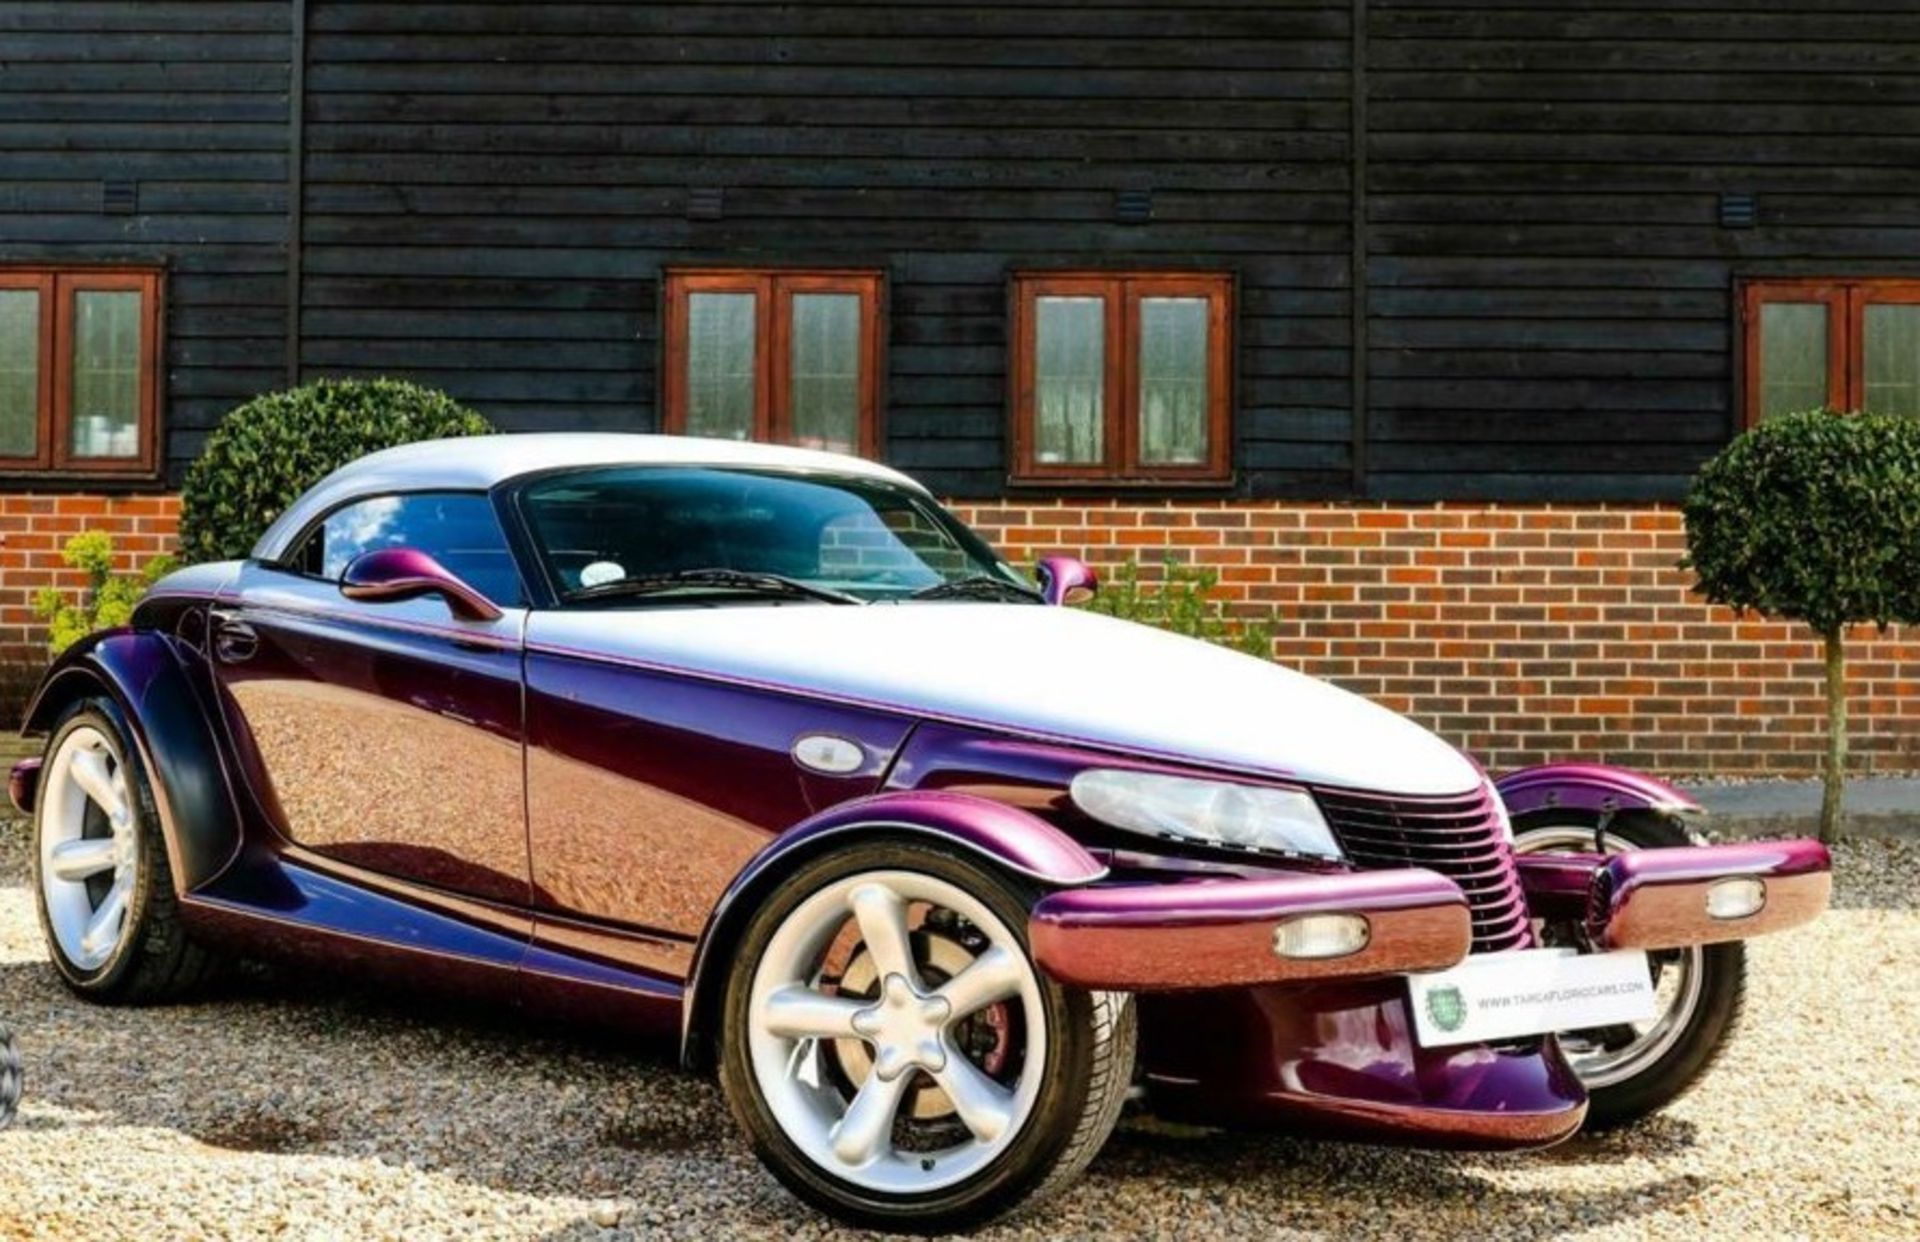 1998 CHRYSLER PLYMOUTH PROWLER V6 2 DOOR CONVERTIBLE, 3500cc PETROL ENGINE, AUTO *NO VAT* - Image 2 of 27